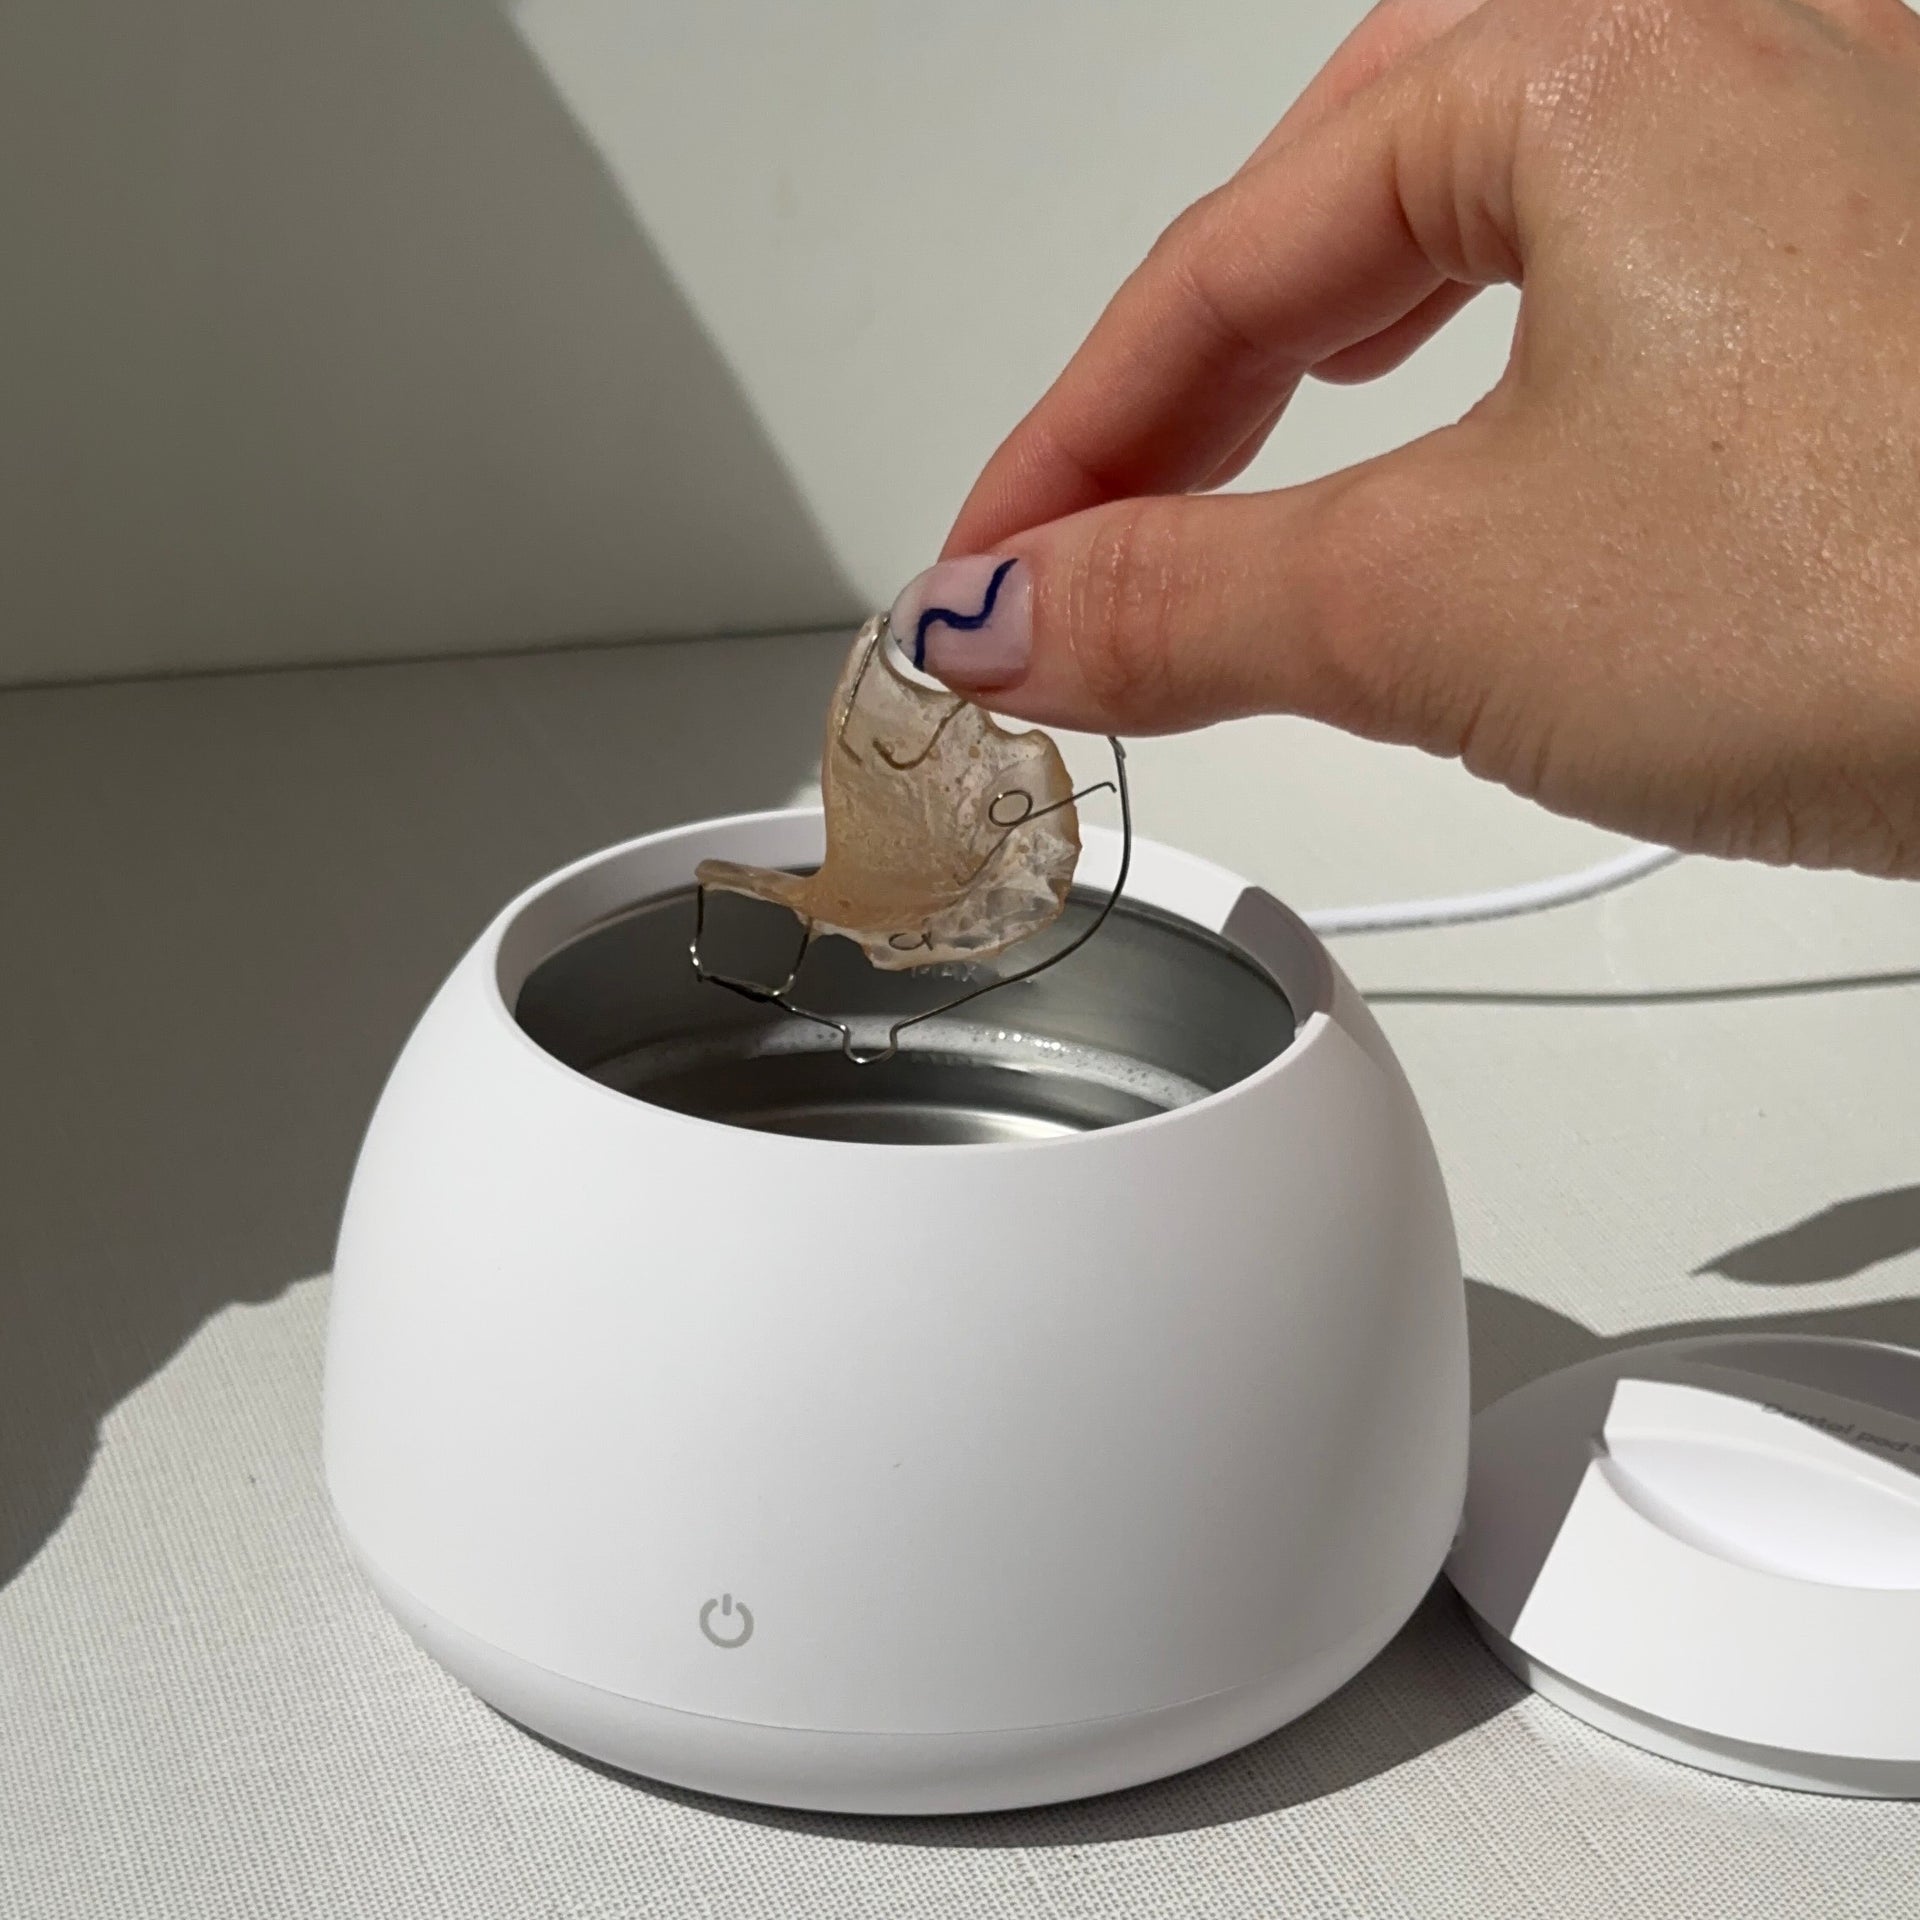 This @ZIMA DENTAL pod will help clean your appliances… Today I explain